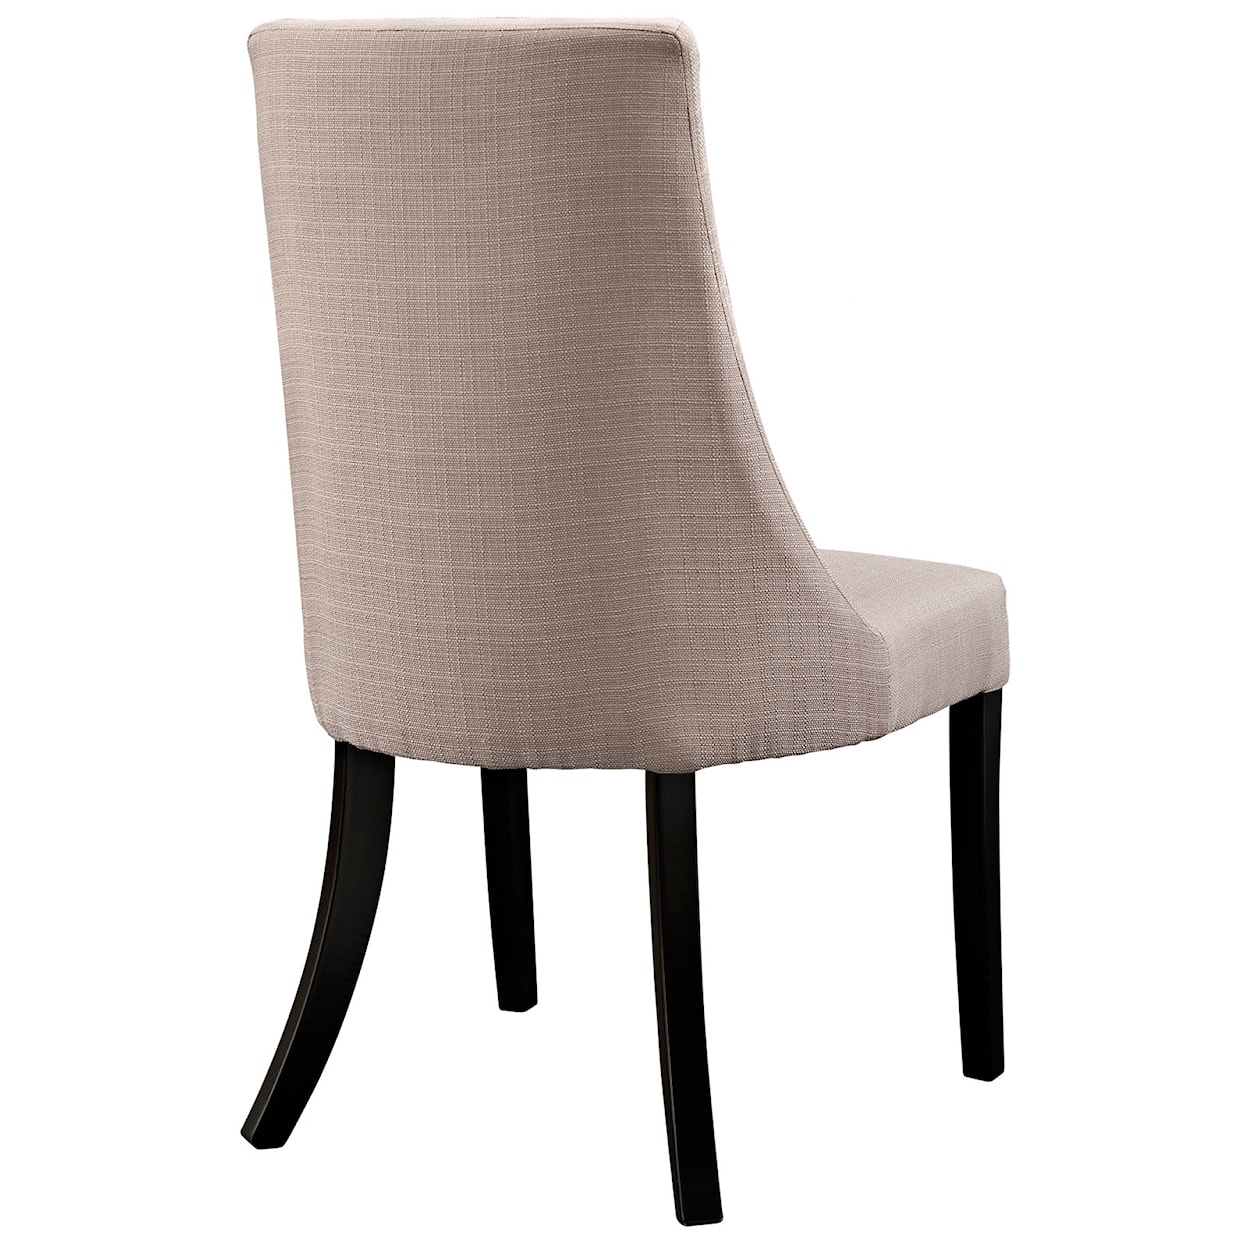 Modway Reverie Dining Side Chair